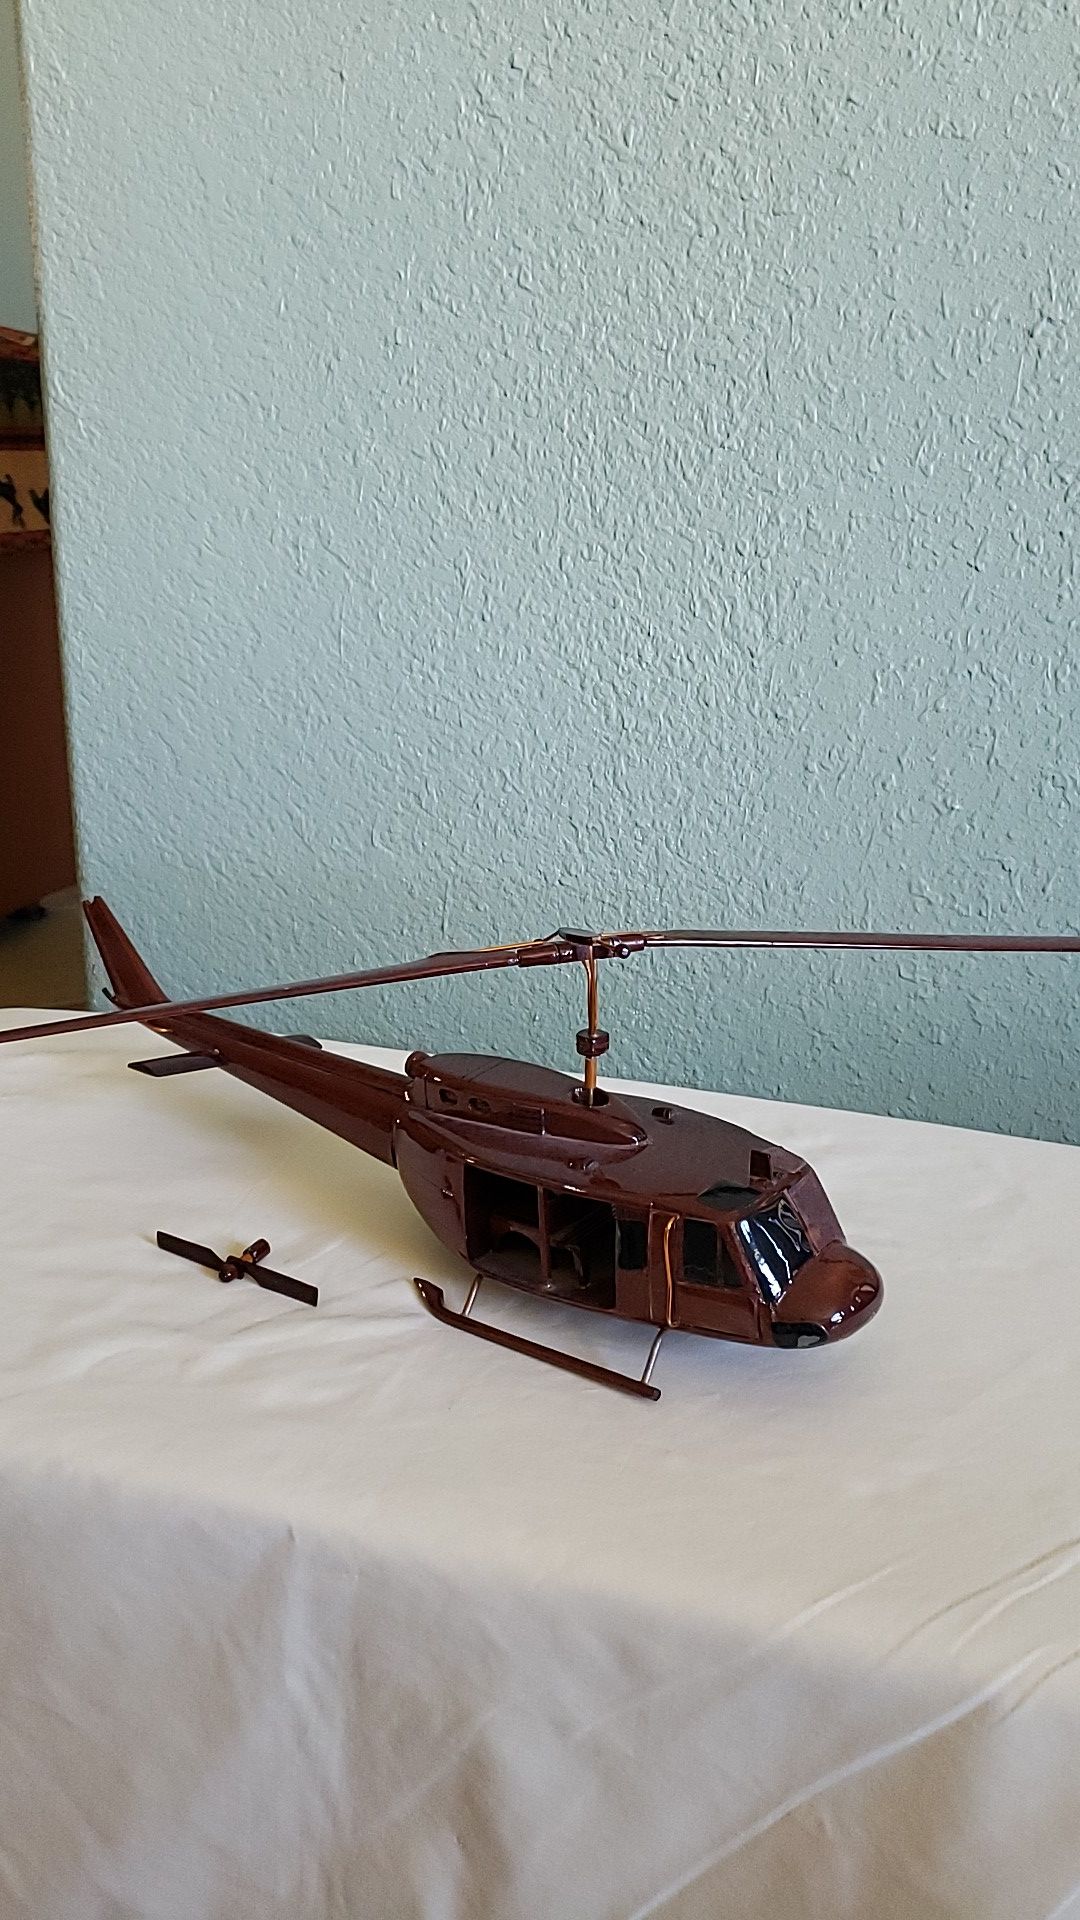 wooden helicopter